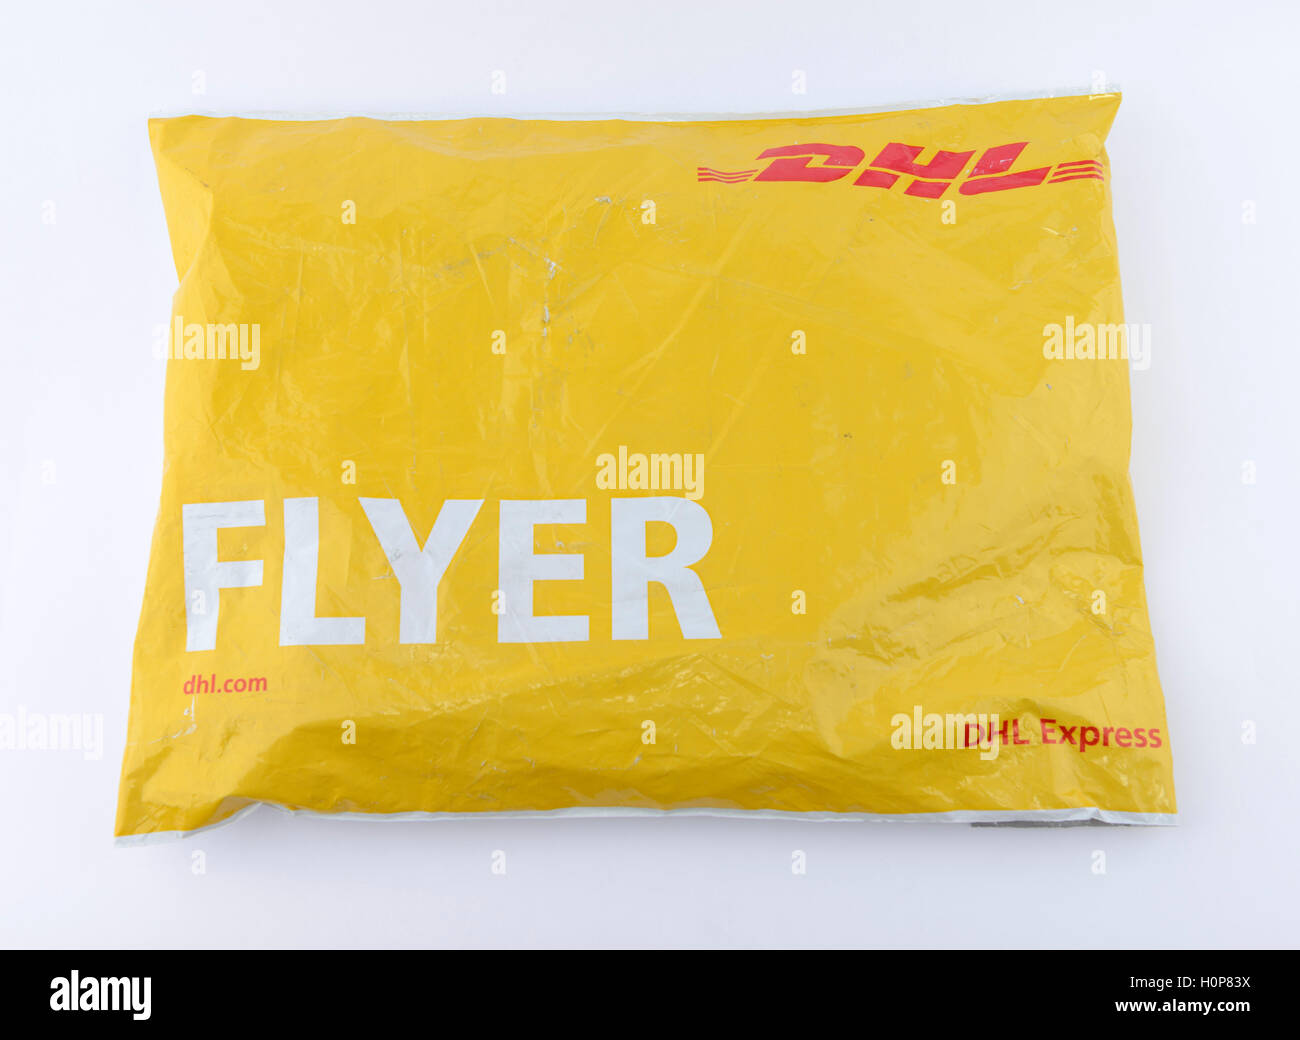 DHL flyer package envelope Stock Photo